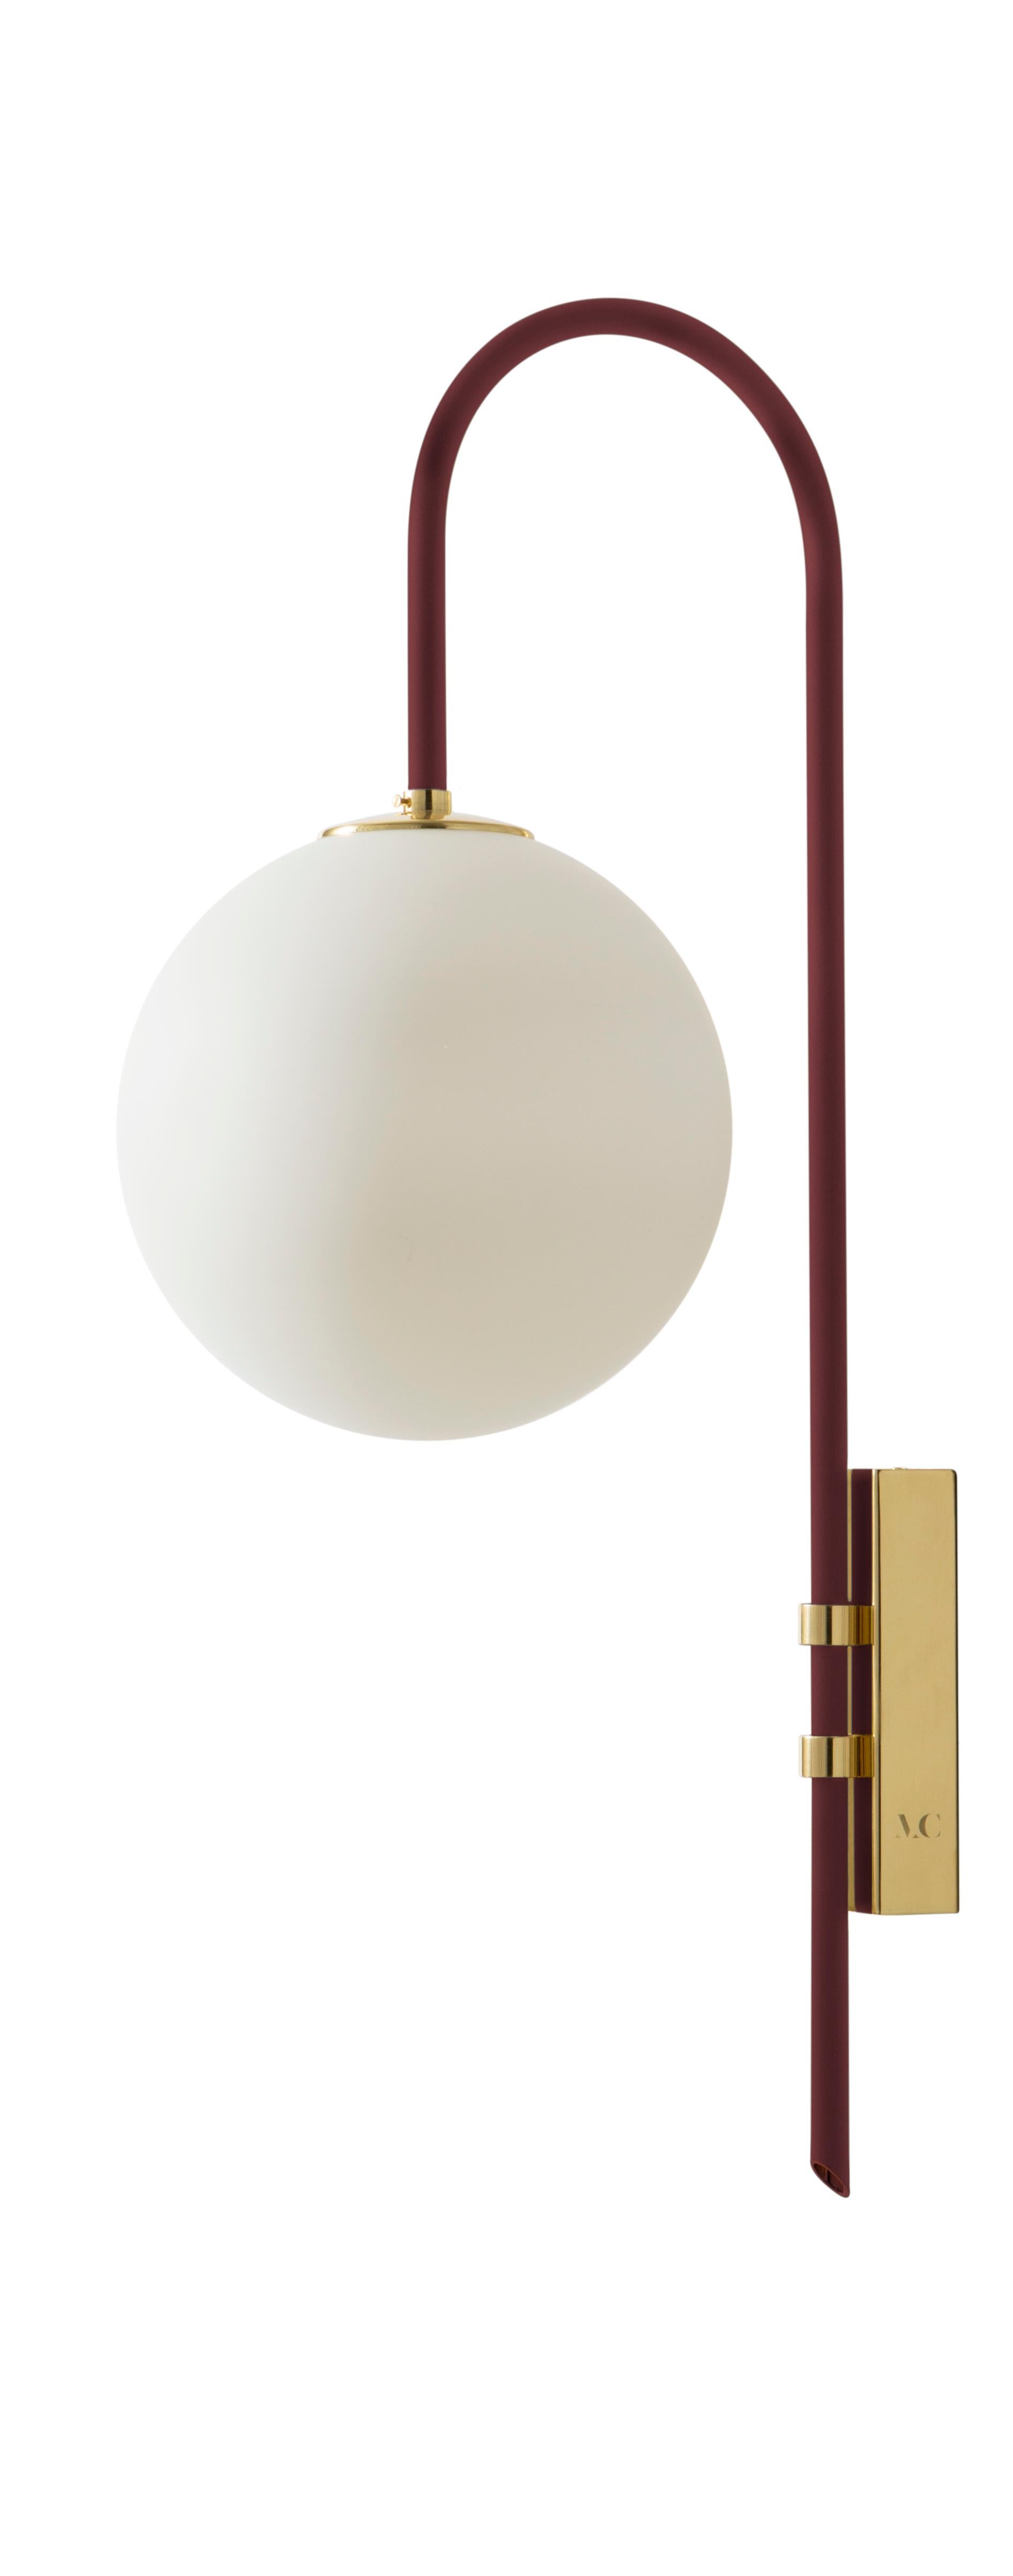 Set of 2 red brass wall lamp 06 by Magic Circus Editions
Dimensions: H 77 x W 25 x D 36.5 cm
Materials: Smooth brass, mouth blown glass
Sphere dimensions: 25 cm

Available finishes: Brass, nickel
All our lamps can be wired according to each